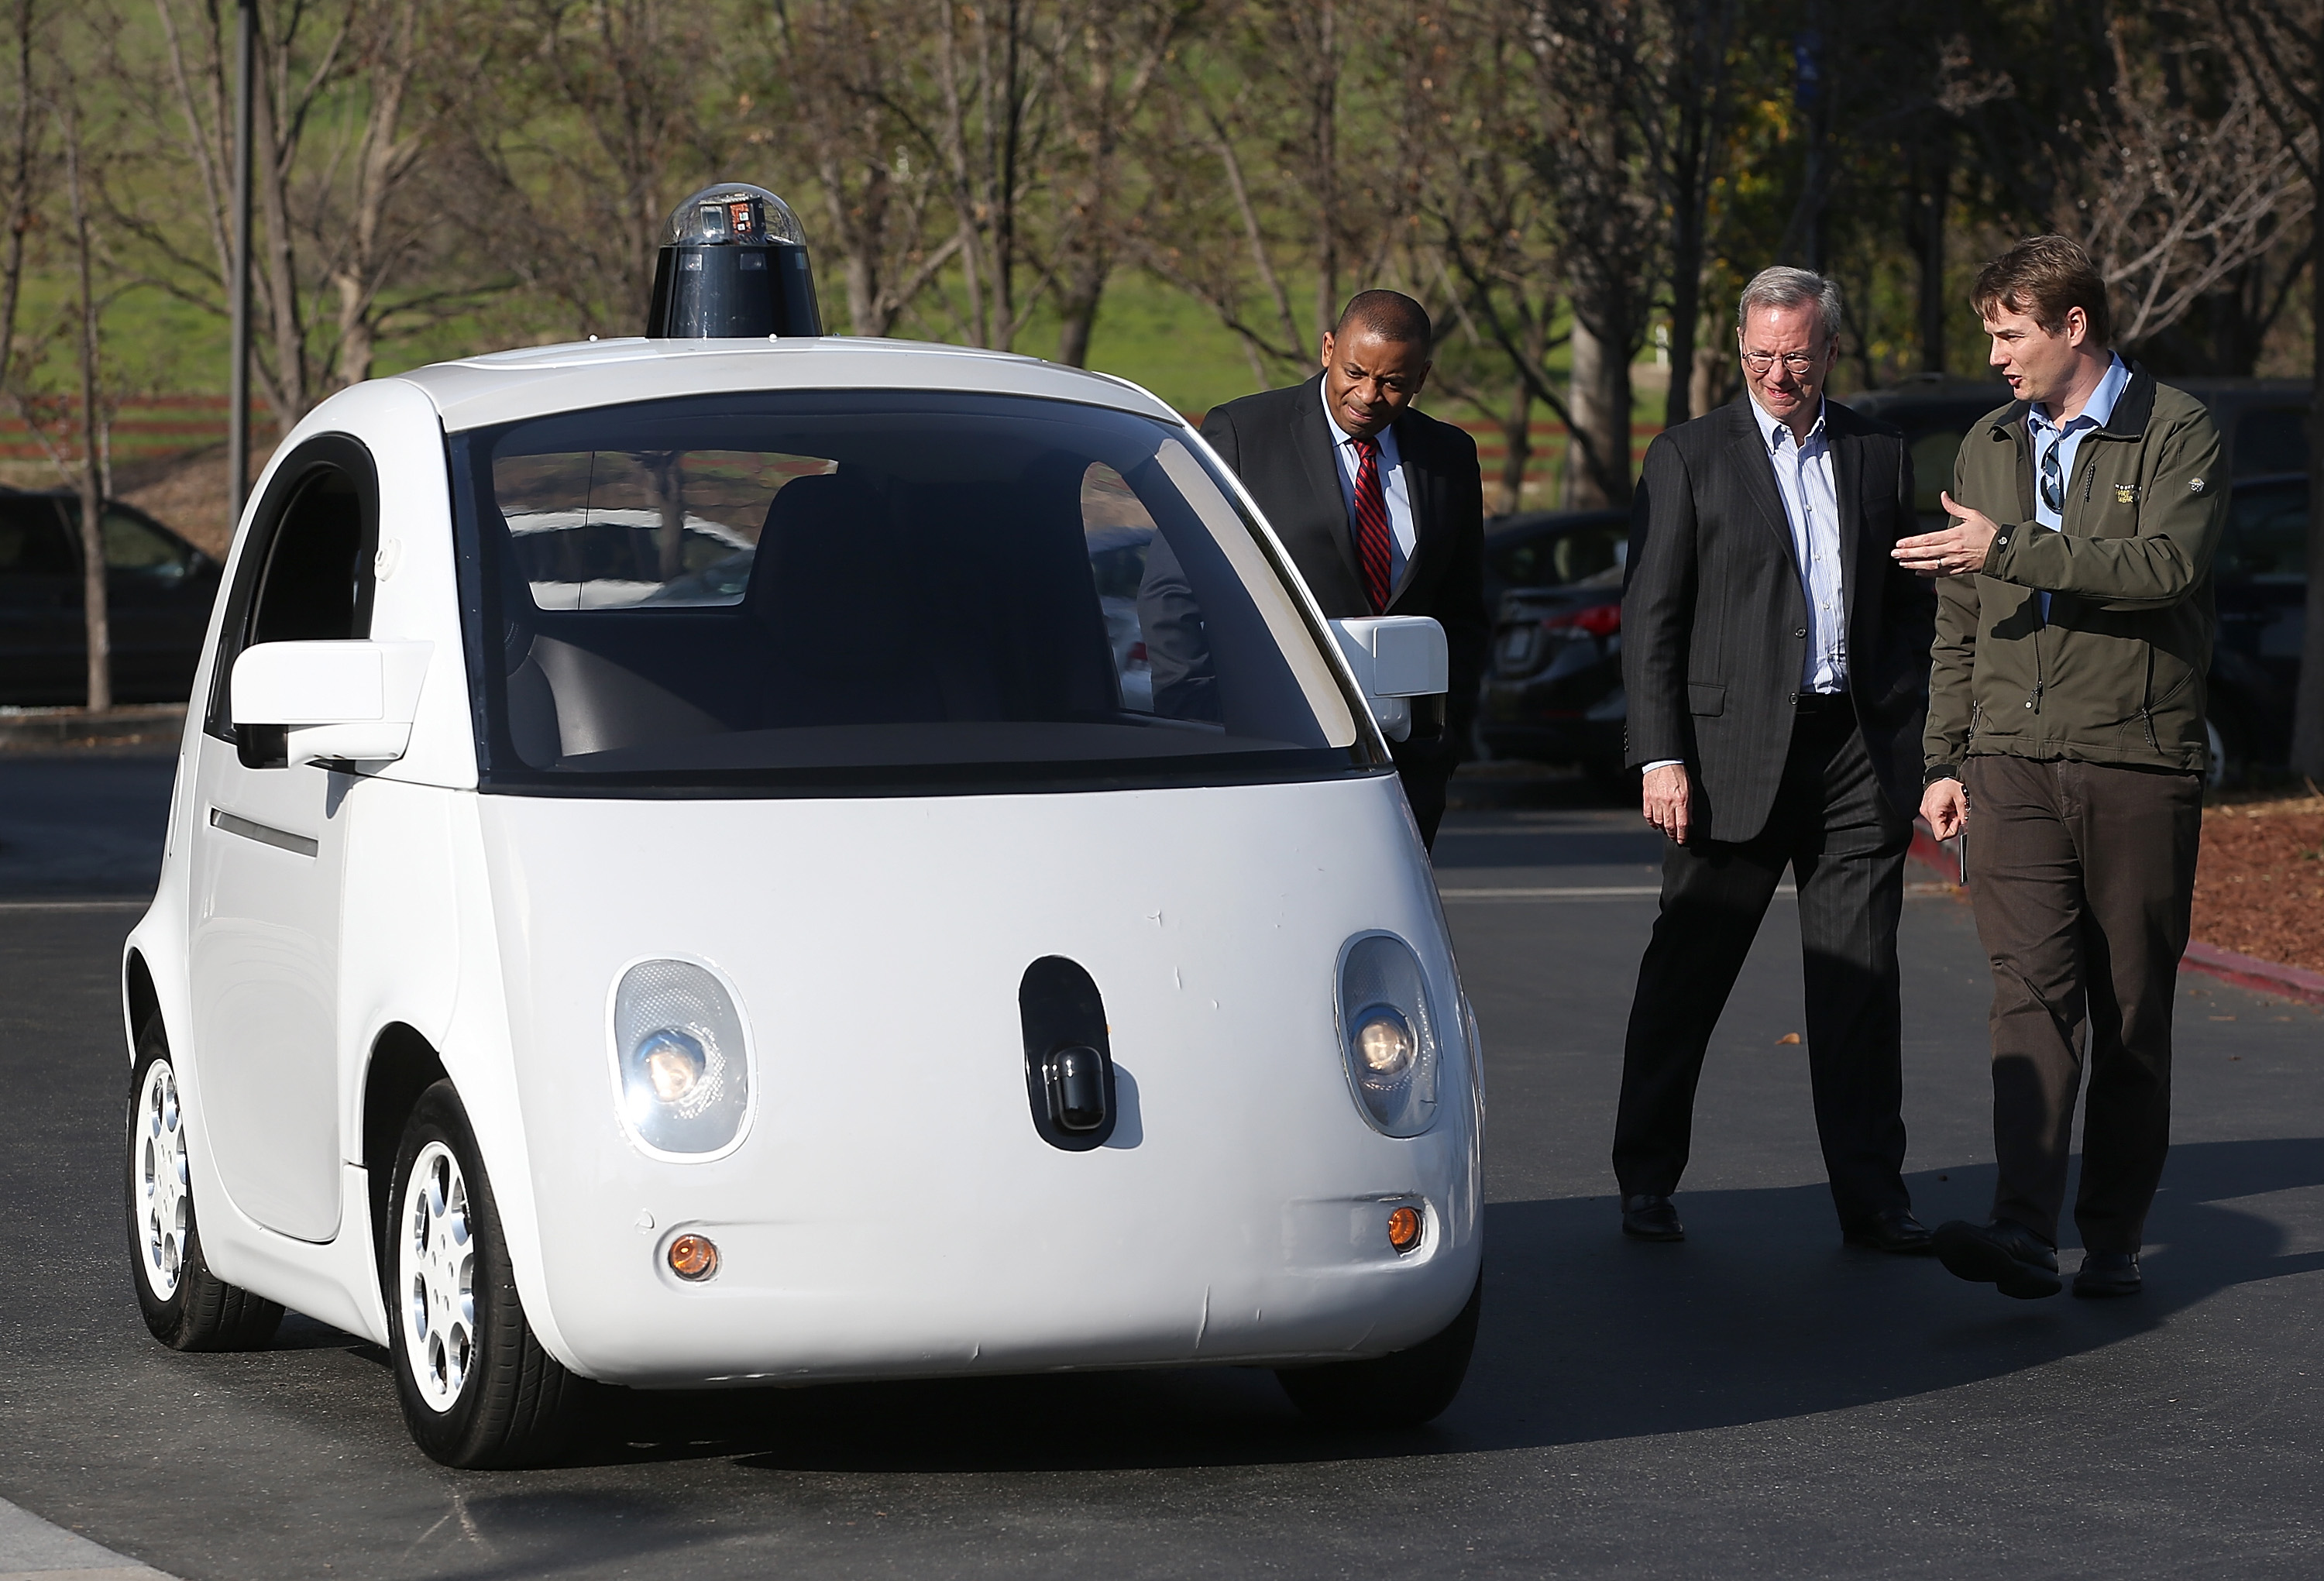 Google's Chris Urmson (R) shows a Google self-driving car to U.S. Transportation Secretary Anthony Foxx (L) and Google Chairman Eric Schmidt (C) at the Google headquarters on February 2, 2015 in Mountain View, California.  U.S. Transportation Secretary Anthony Foxx joined Google Chairman Eric Schmidt for a fireside chat where he unveiled Beyond Traffic, a new analysis from the U.S. Department of Transportation that anticipates the trends and choices facing our transportation system over the next three decades. (Justin Sullivan—Getty Images)